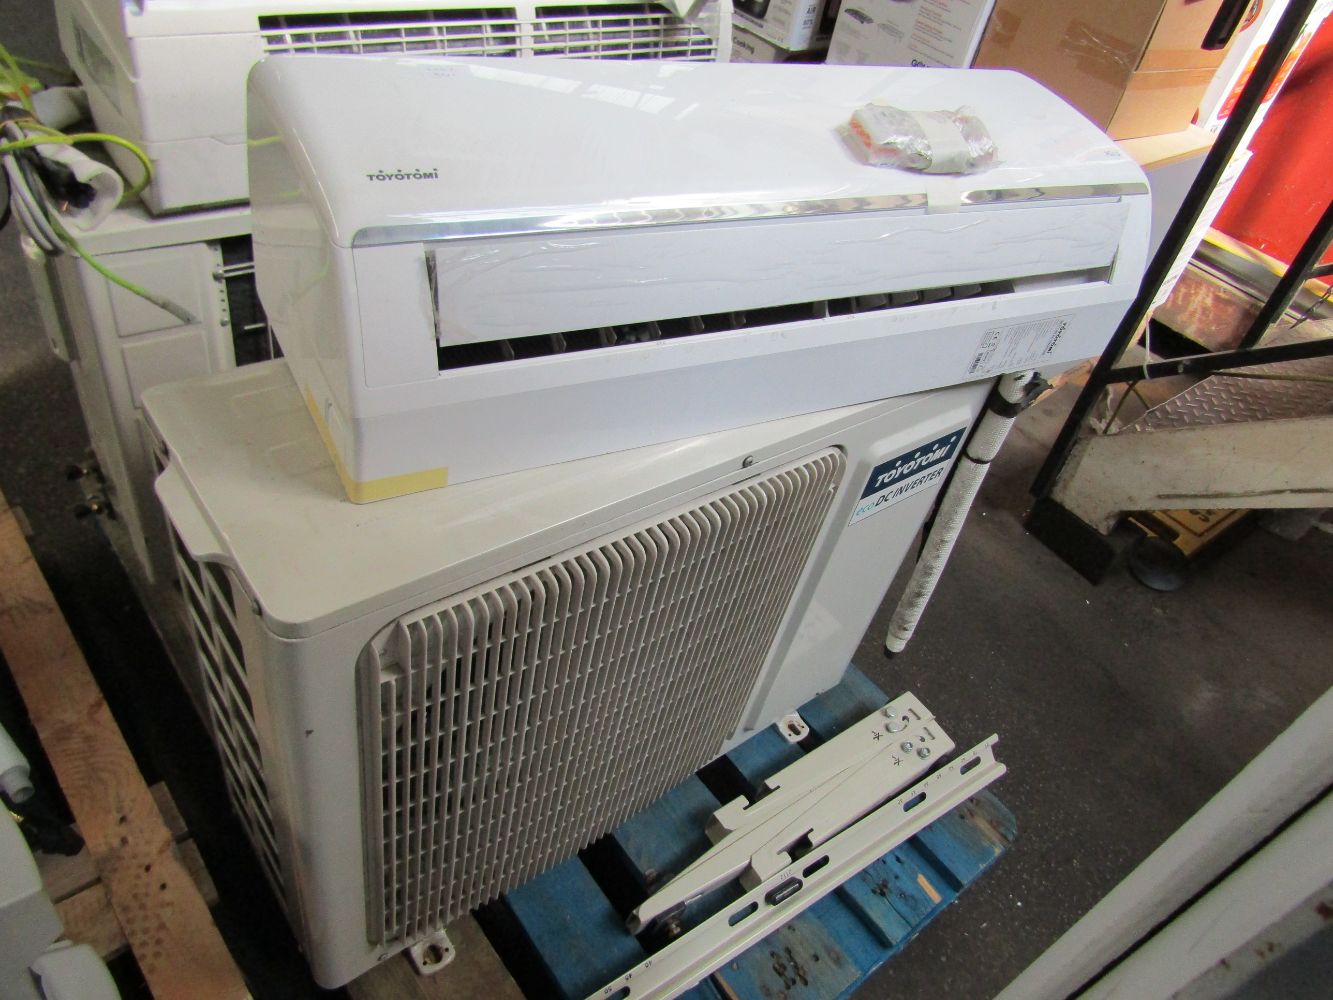 10% buyers Commission on Projectors, audio, turntables, air con units, Laptops and more